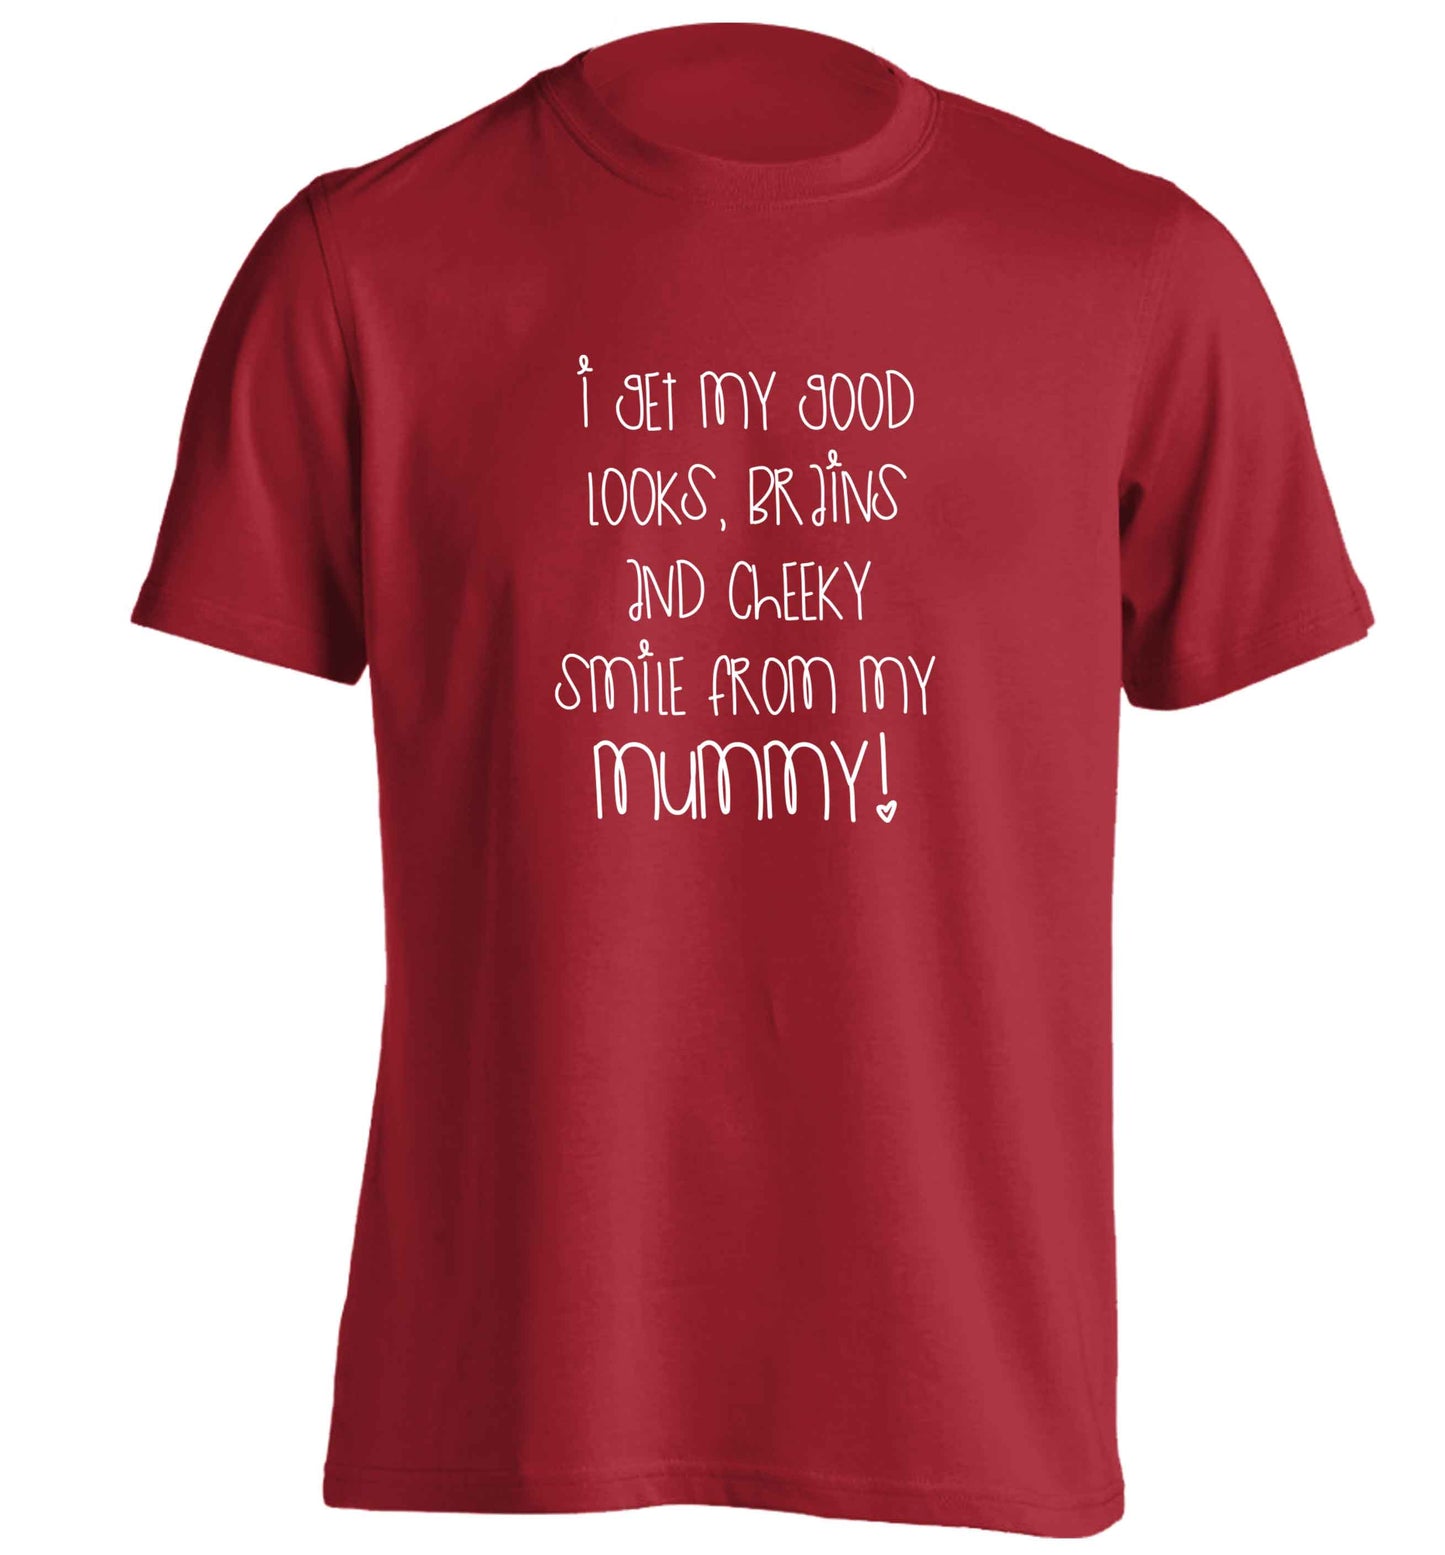 I get my good looks, brains and cheeky smile from my mummy adults unisex red Tshirt 2XL